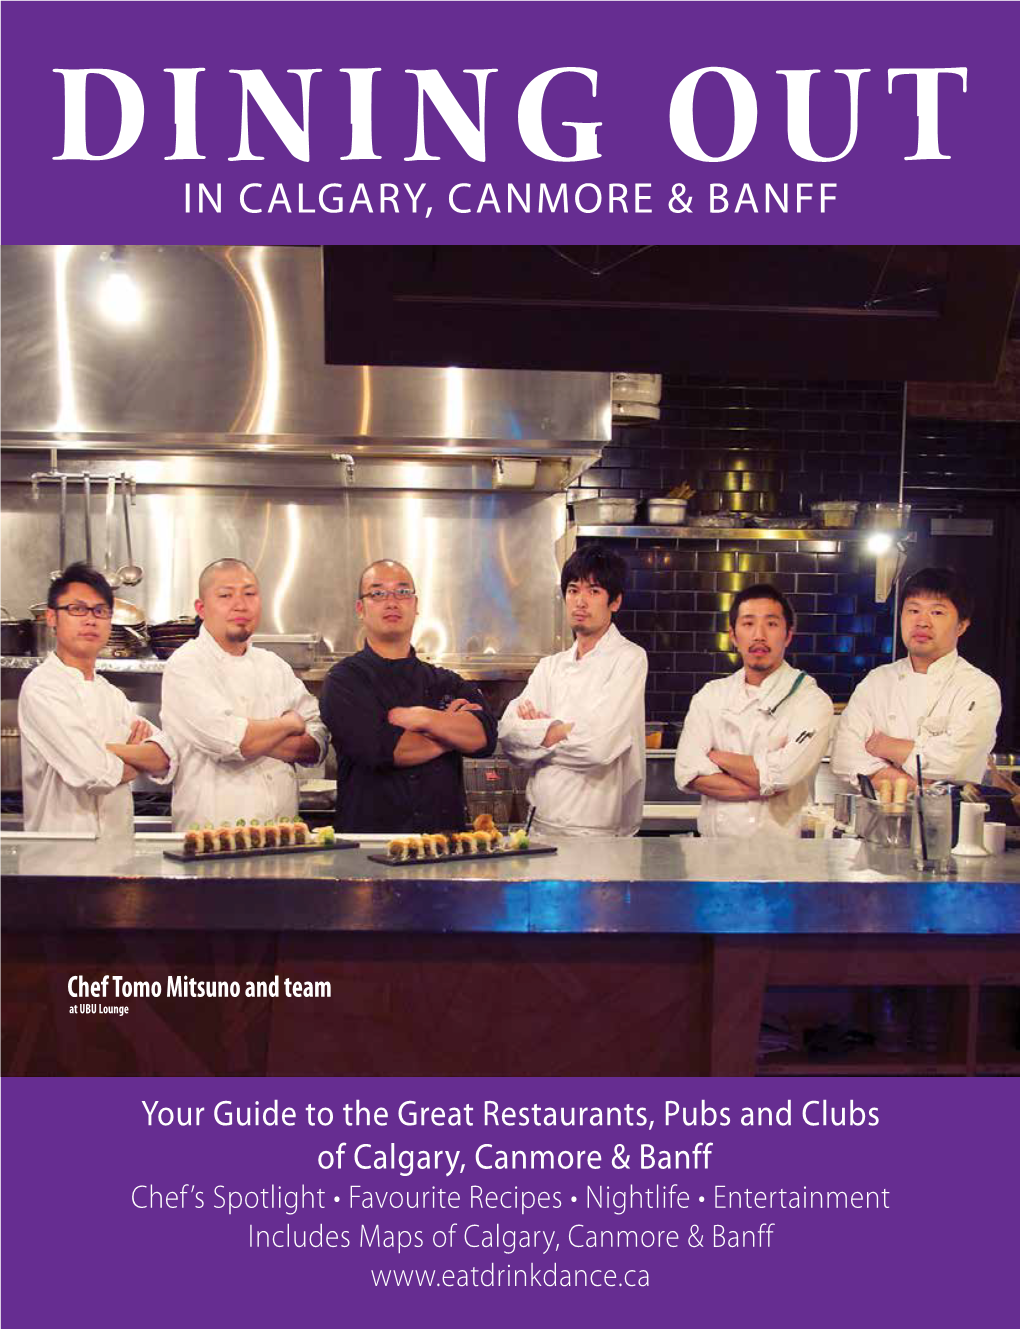 Dining out in Calgary, Canmore & Banff